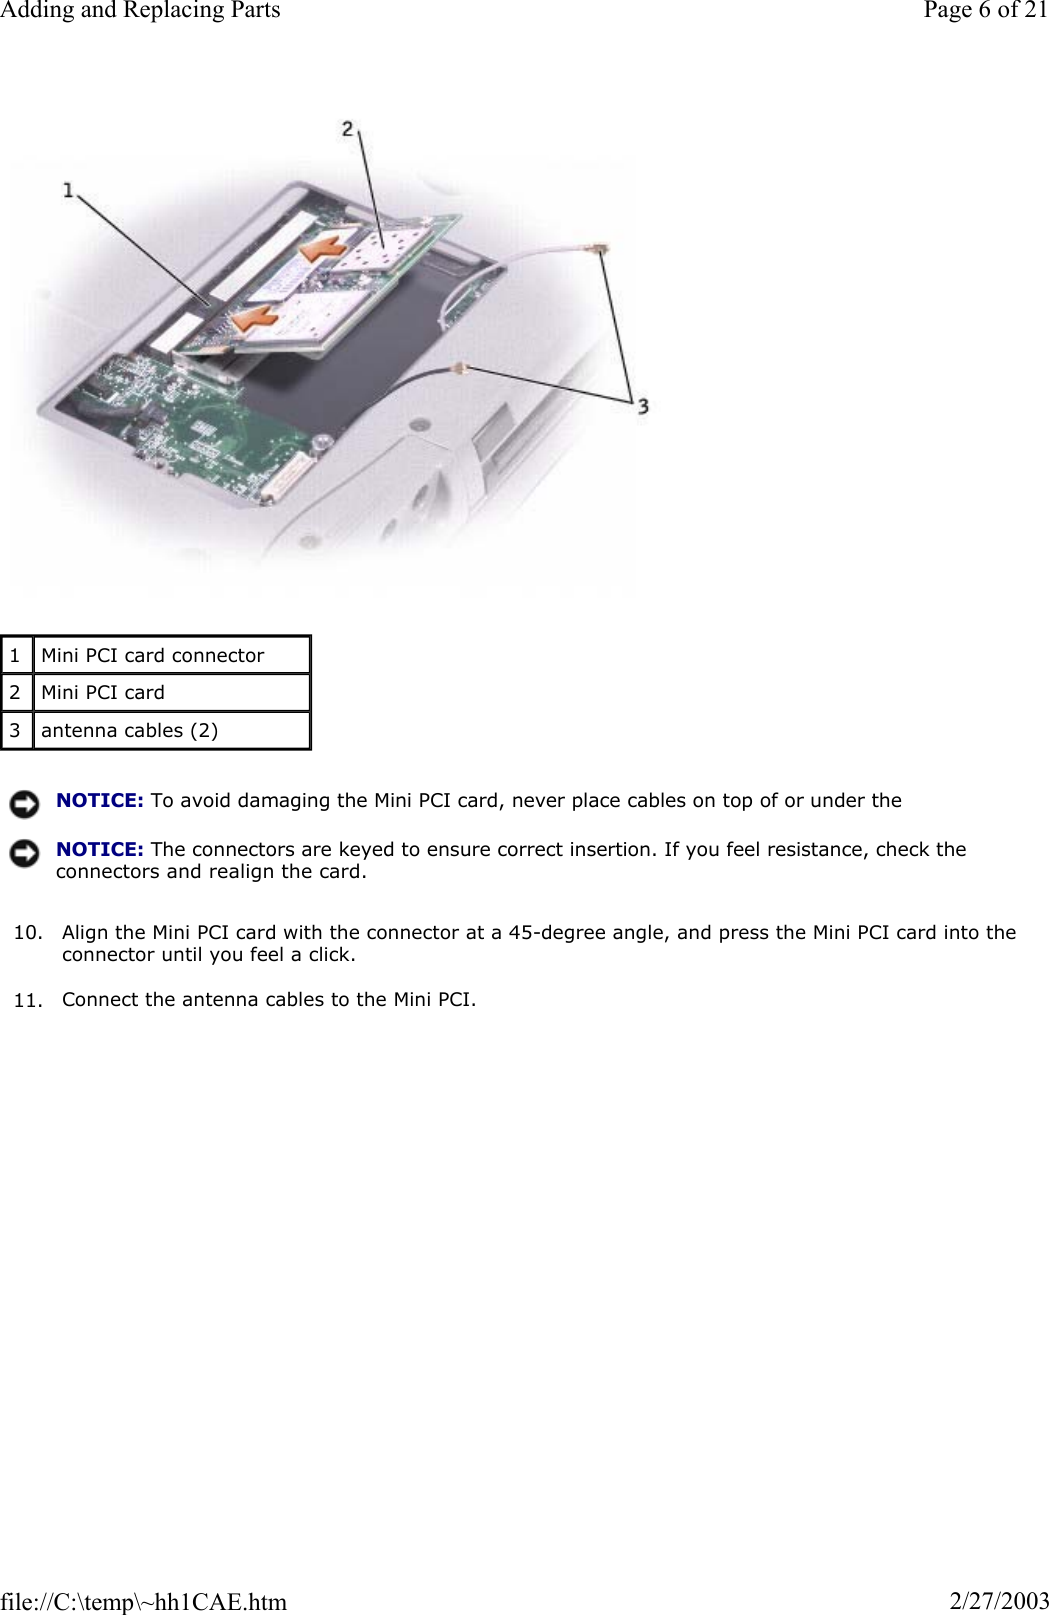 10. Align the Mini PCI card with the connector at a 45-degree angle, and press the Mini PCI card into the connector until you feel a click. 11. Connect the antenna cables to the Mini PCI. 1Mini PCI card connector 2Mini PCI card 3antenna cables (2) NOTICE: To avoid damaging the Mini PCI card, never place cables on top of or under the NOTICE: The connectors are keyed to ensure correct insertion. If you feel resistance, check the connectors and realign the card.Page 6 of 21Adding and Replacing Parts2/27/2003file://C:\temp\~hh1CAE.htm